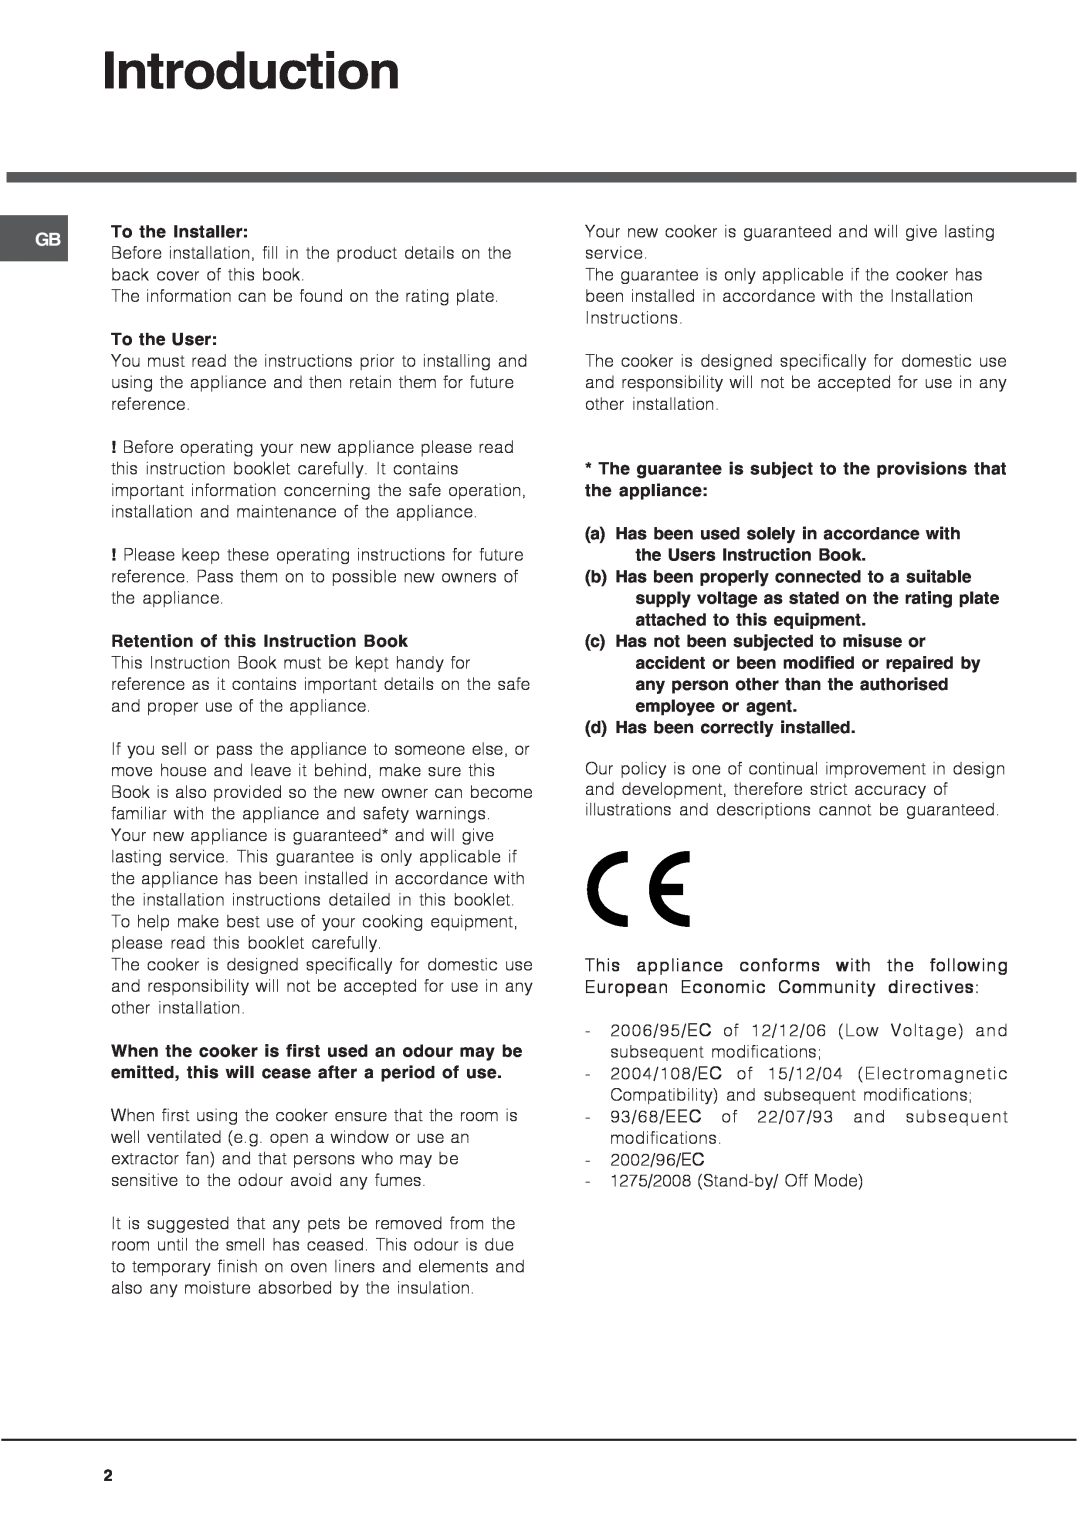 Hotpoint HUE 62 manual Introduction, To the Installer, To the User, Retention of this Instruction Book 